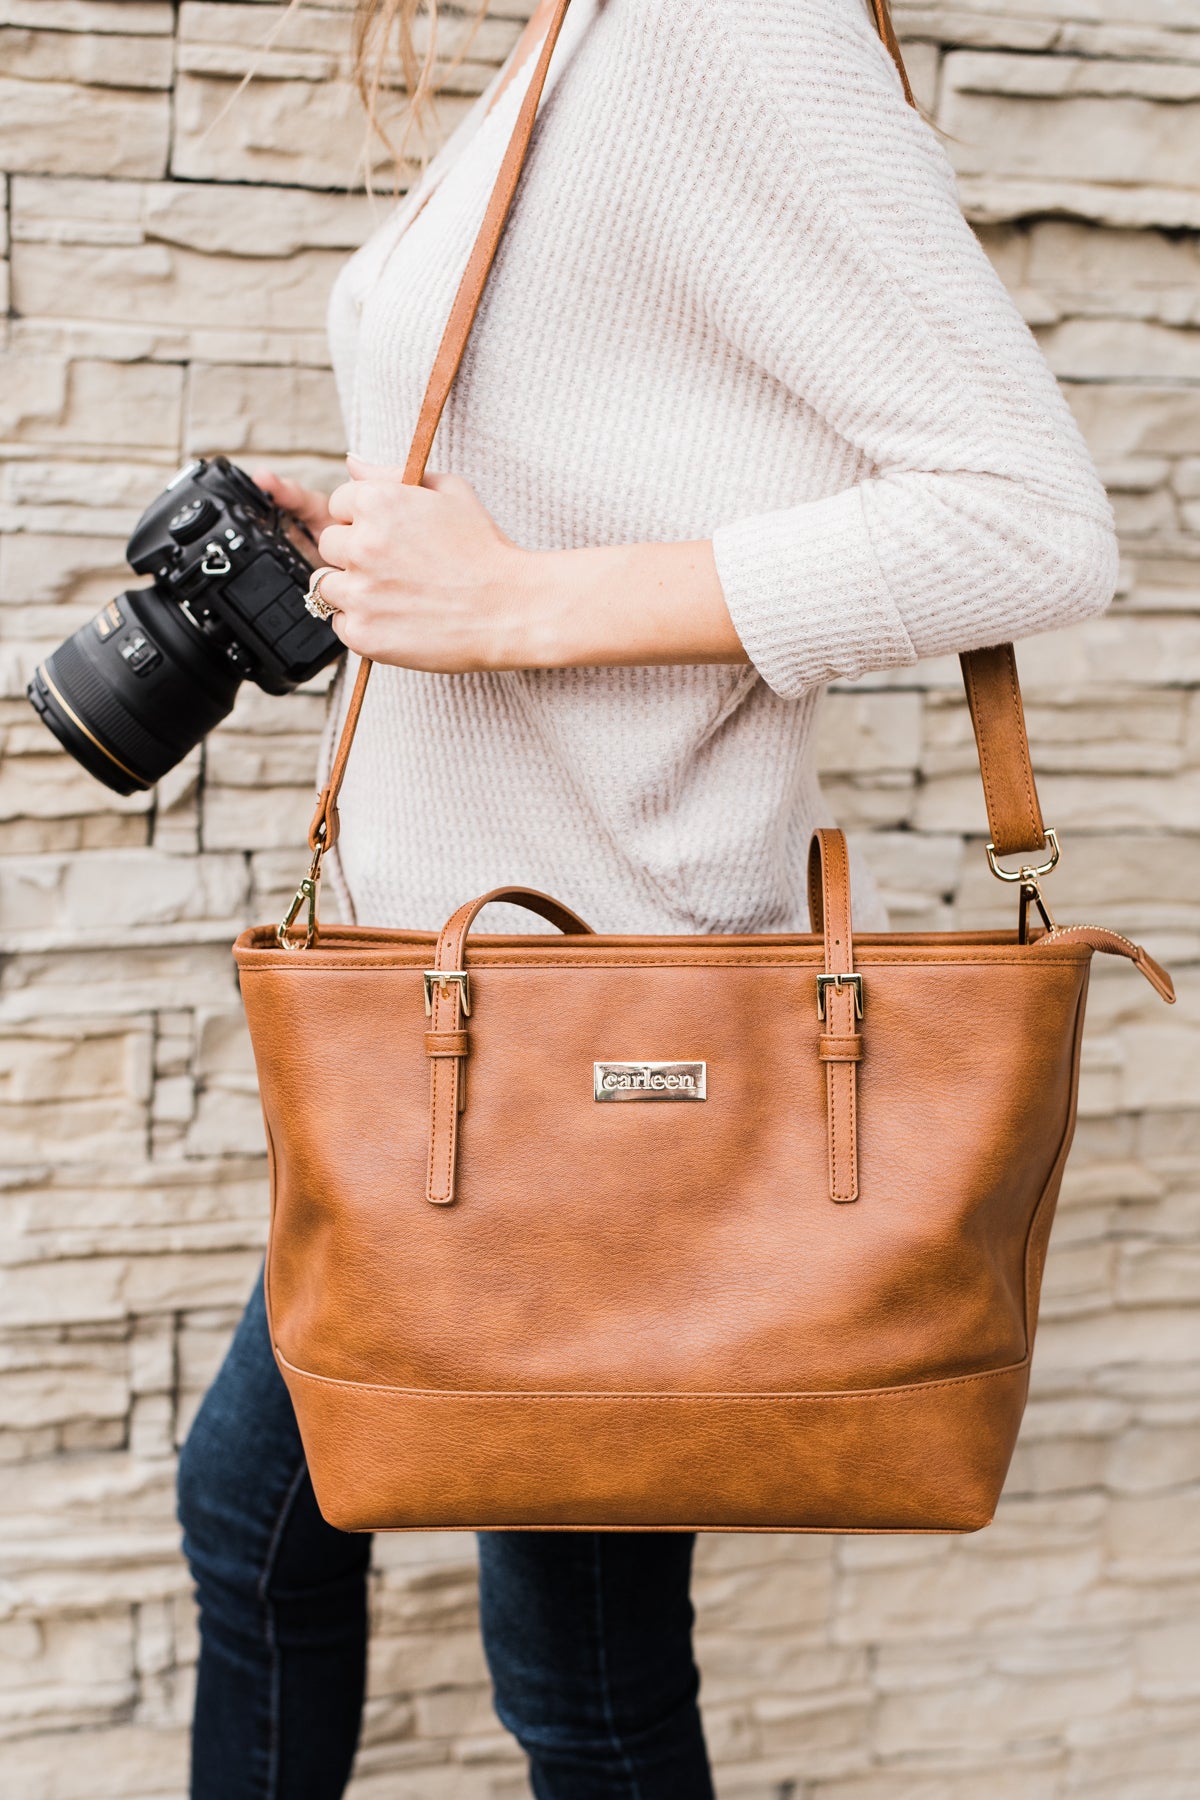 Carleen Creative - Today is a great day to snag a new camera bag. Search “Louise  Everyday Camera Bag” using the link in our bio. 🤎🍂